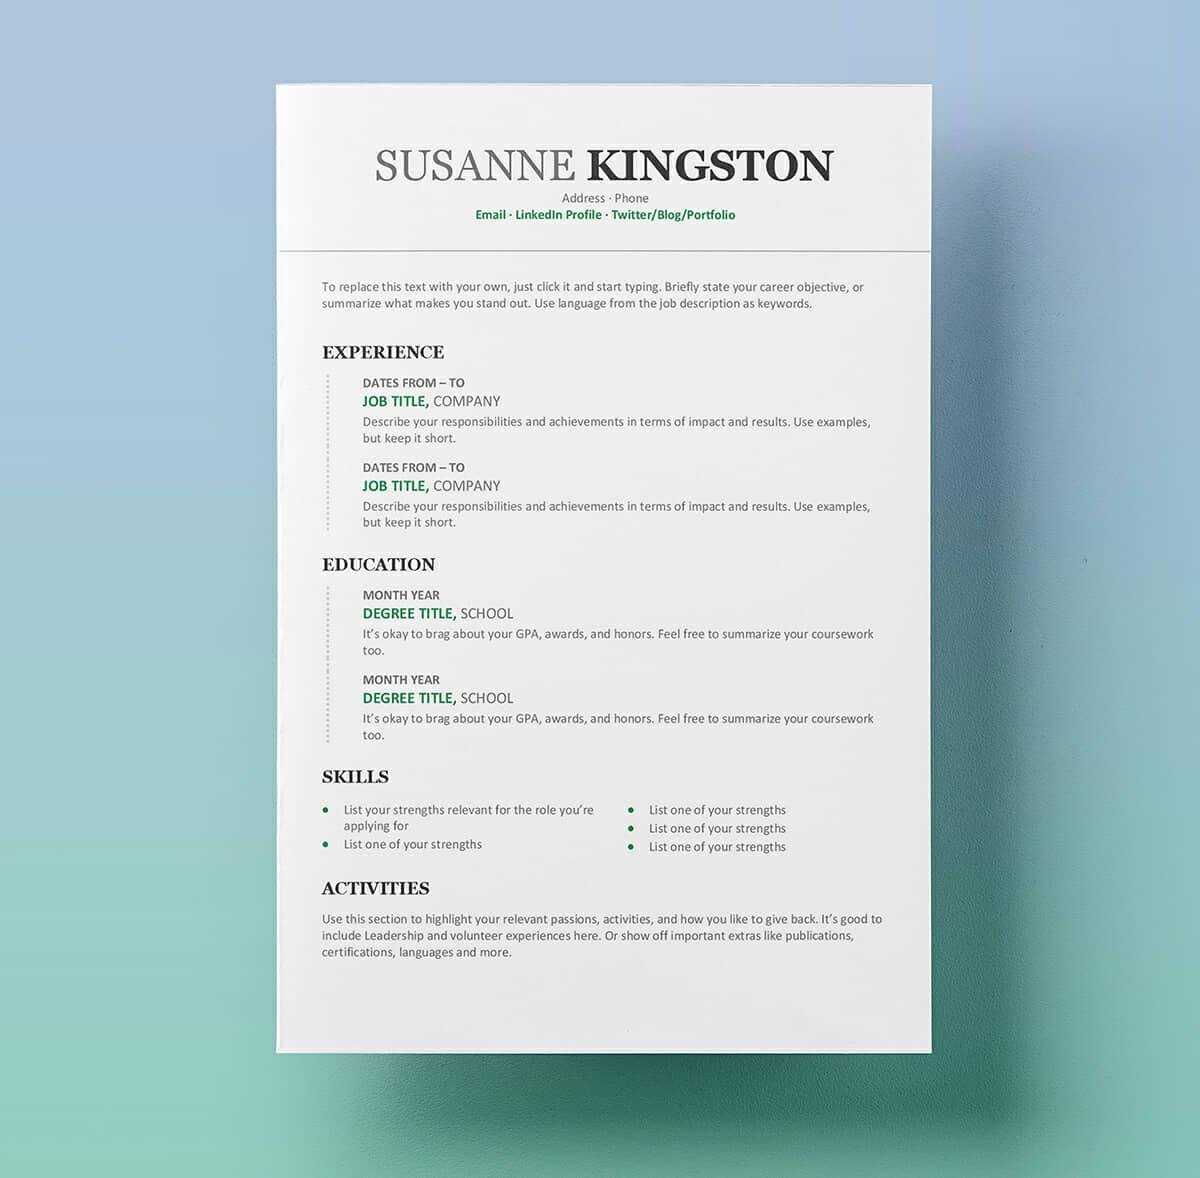 How To Use Resume Template In Word - Calep.midnightpig.co Inside How To Get A Resume Template On Word